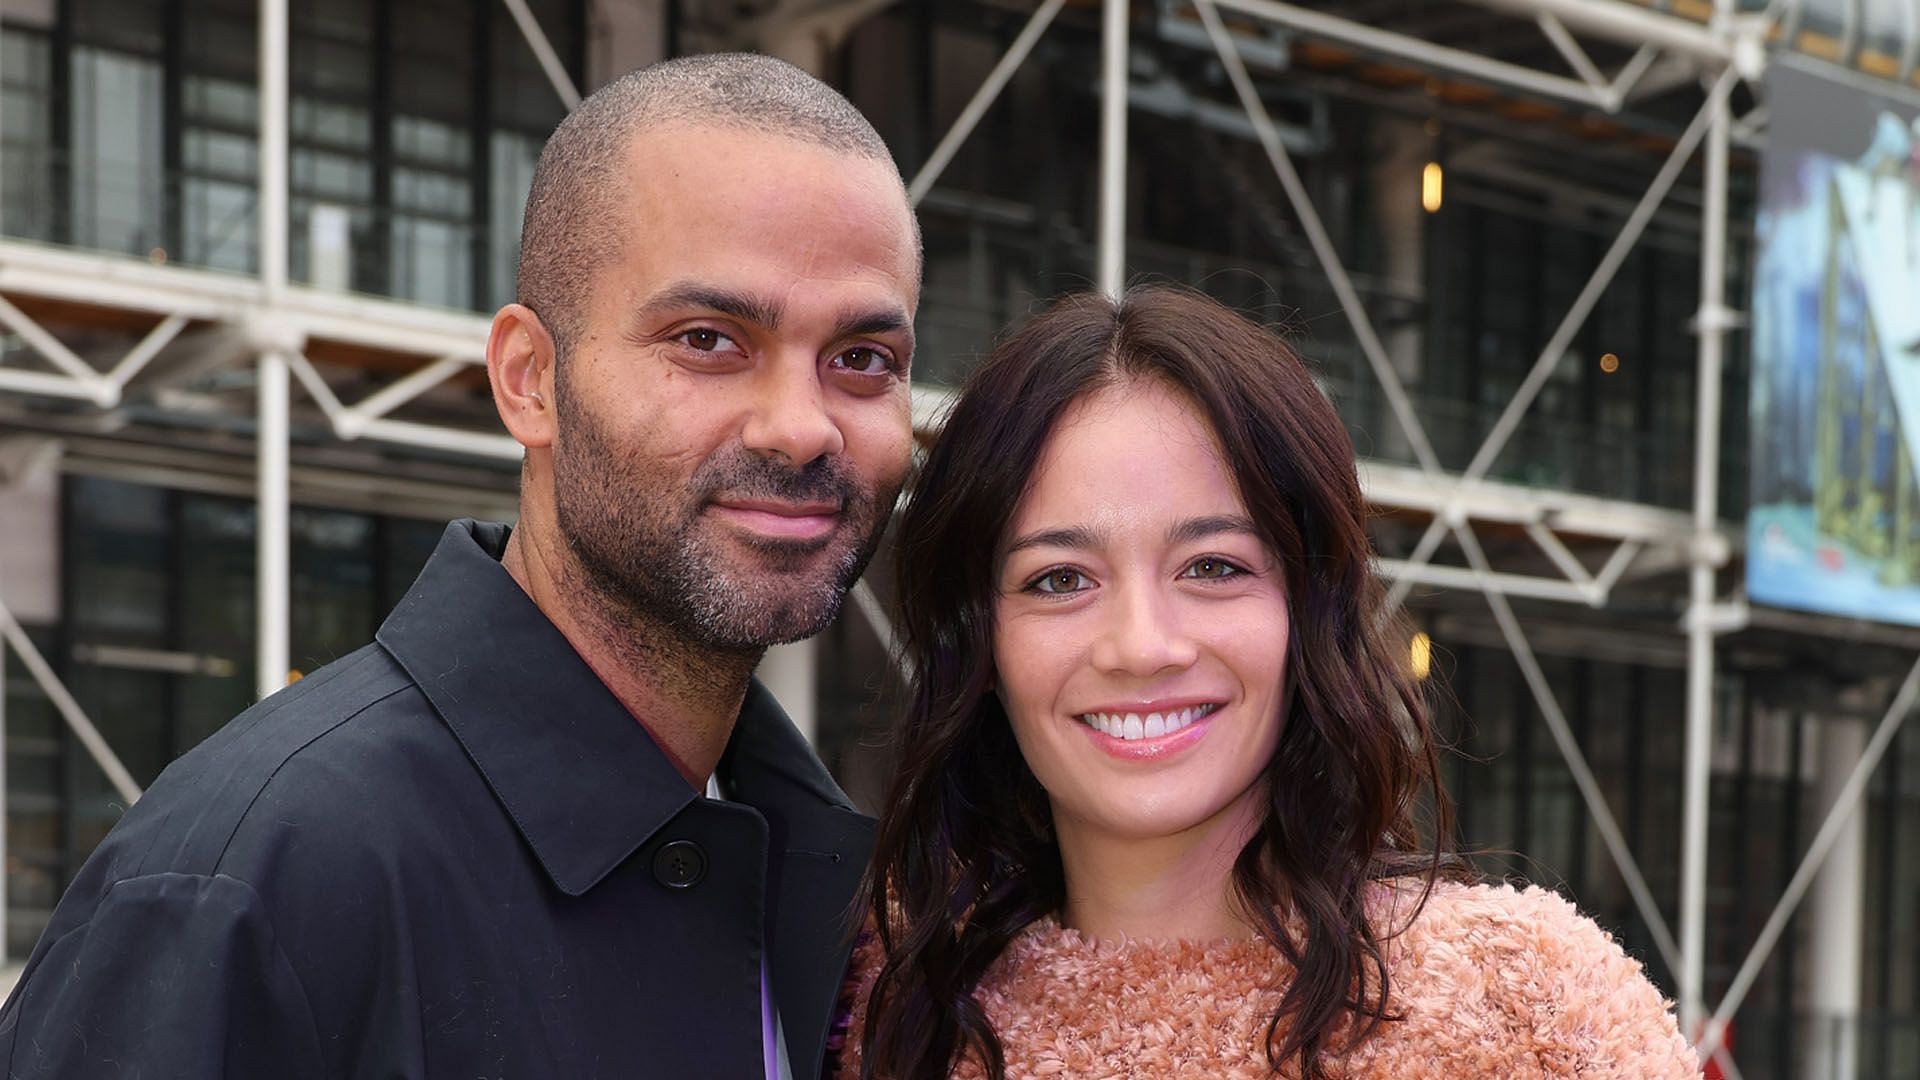 Tony Parker is dating Alize Lim, following his divorce from Axelle Francine